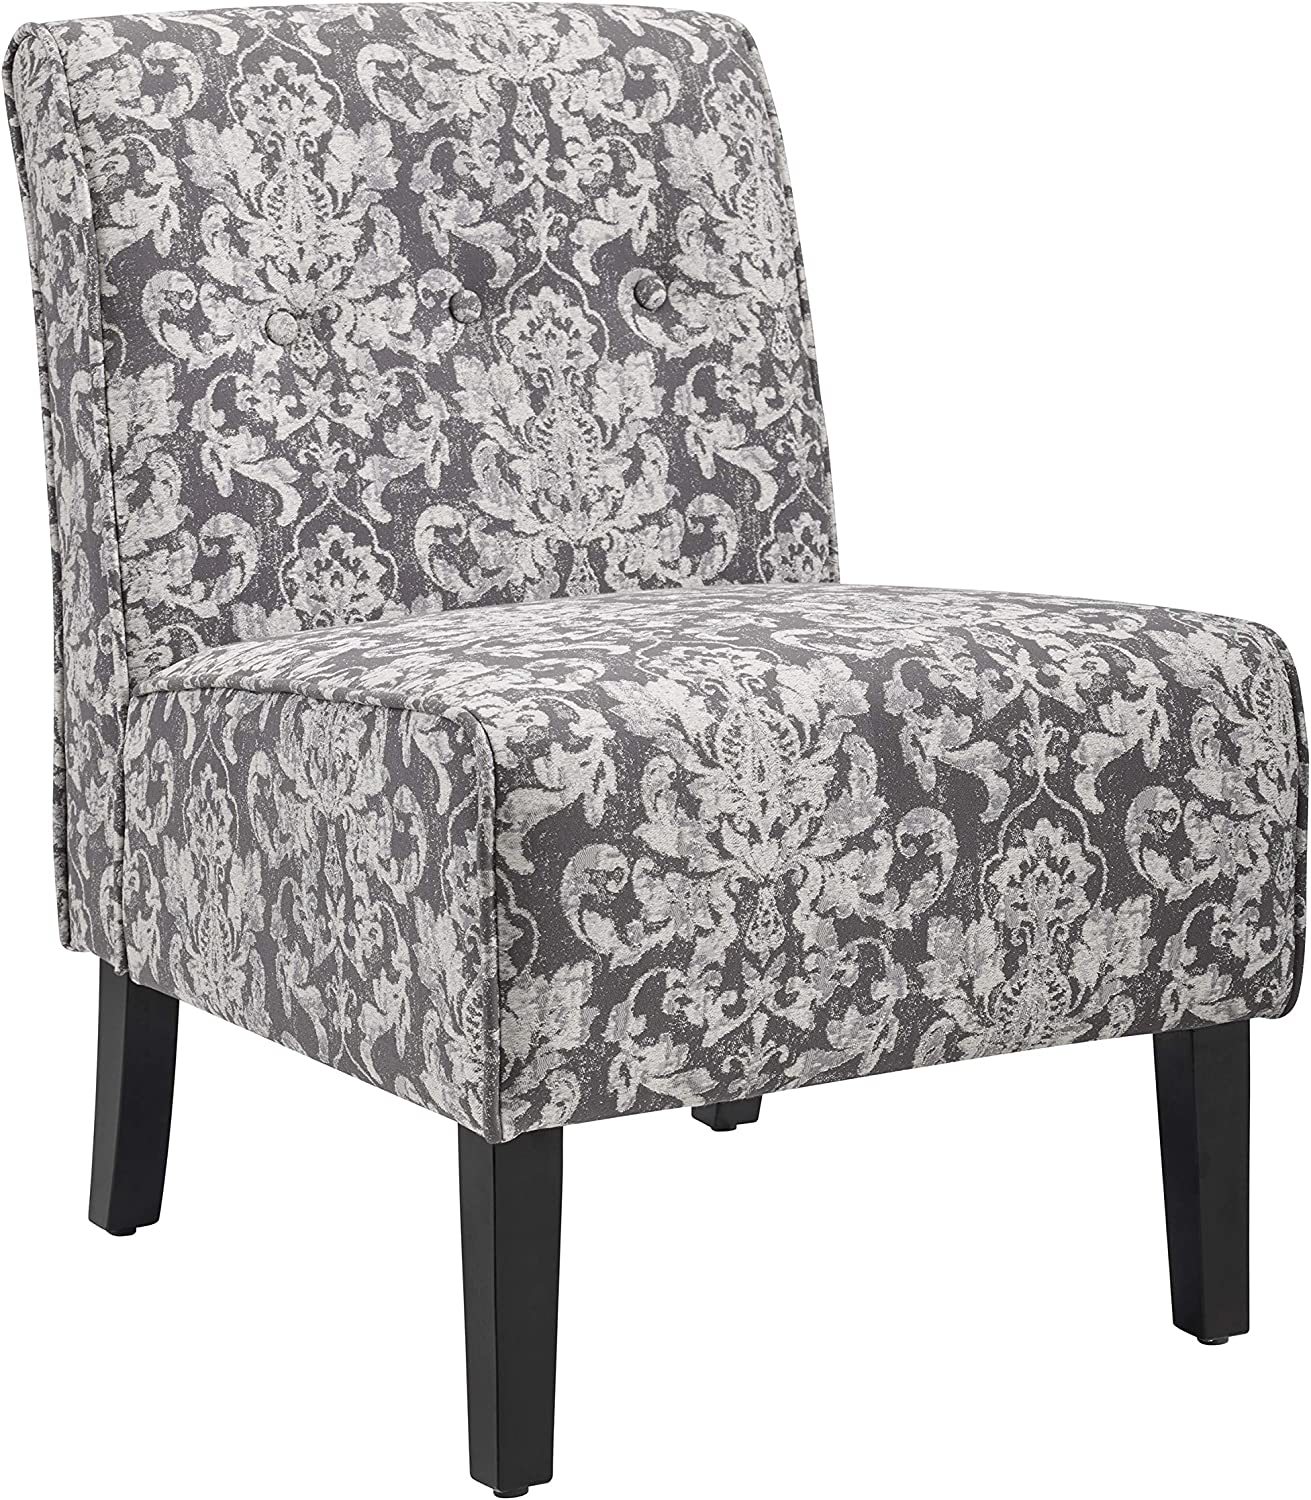 Primary image for Linon Coco Accent Chair, Gray Damask